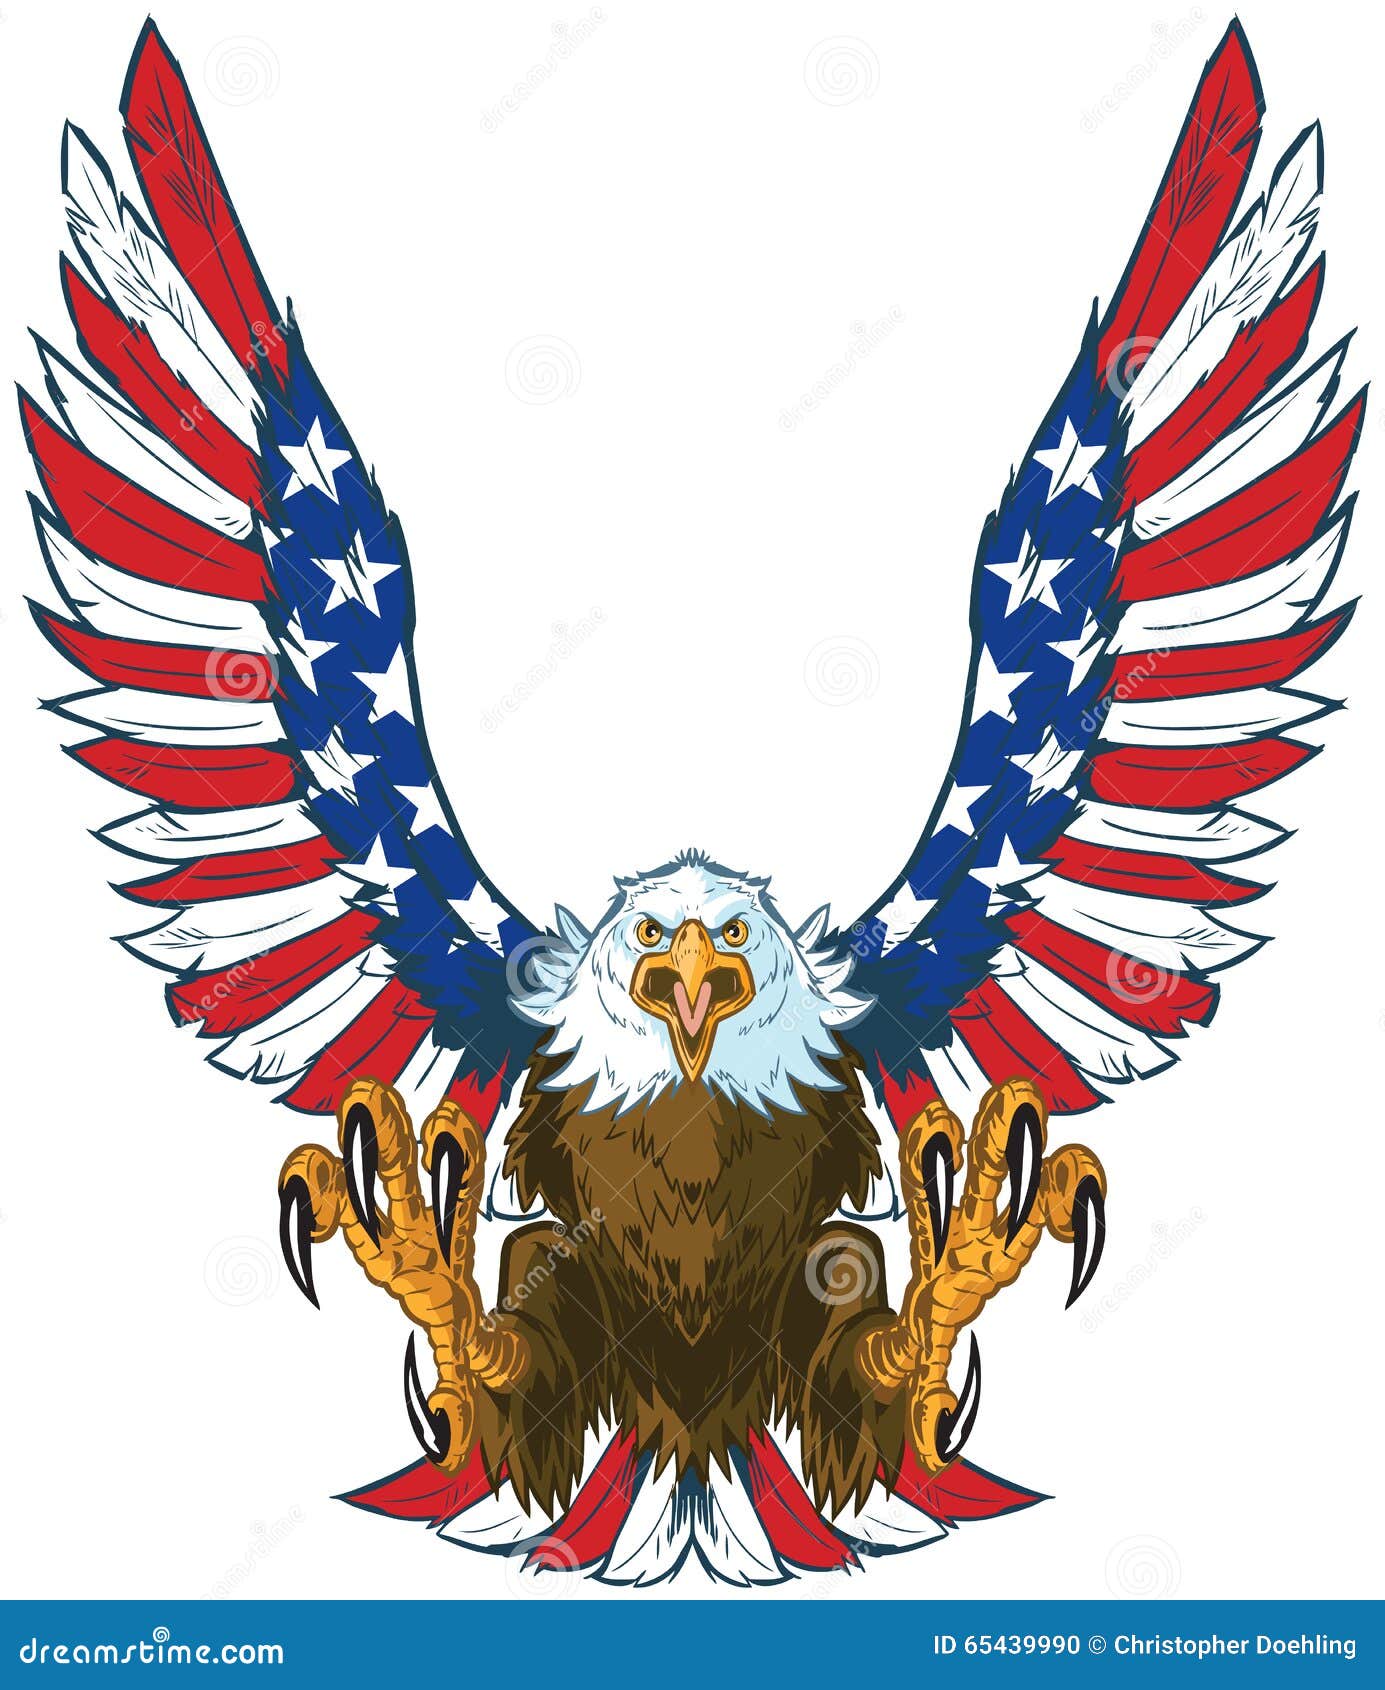 clip art american flag with eagle - photo #49